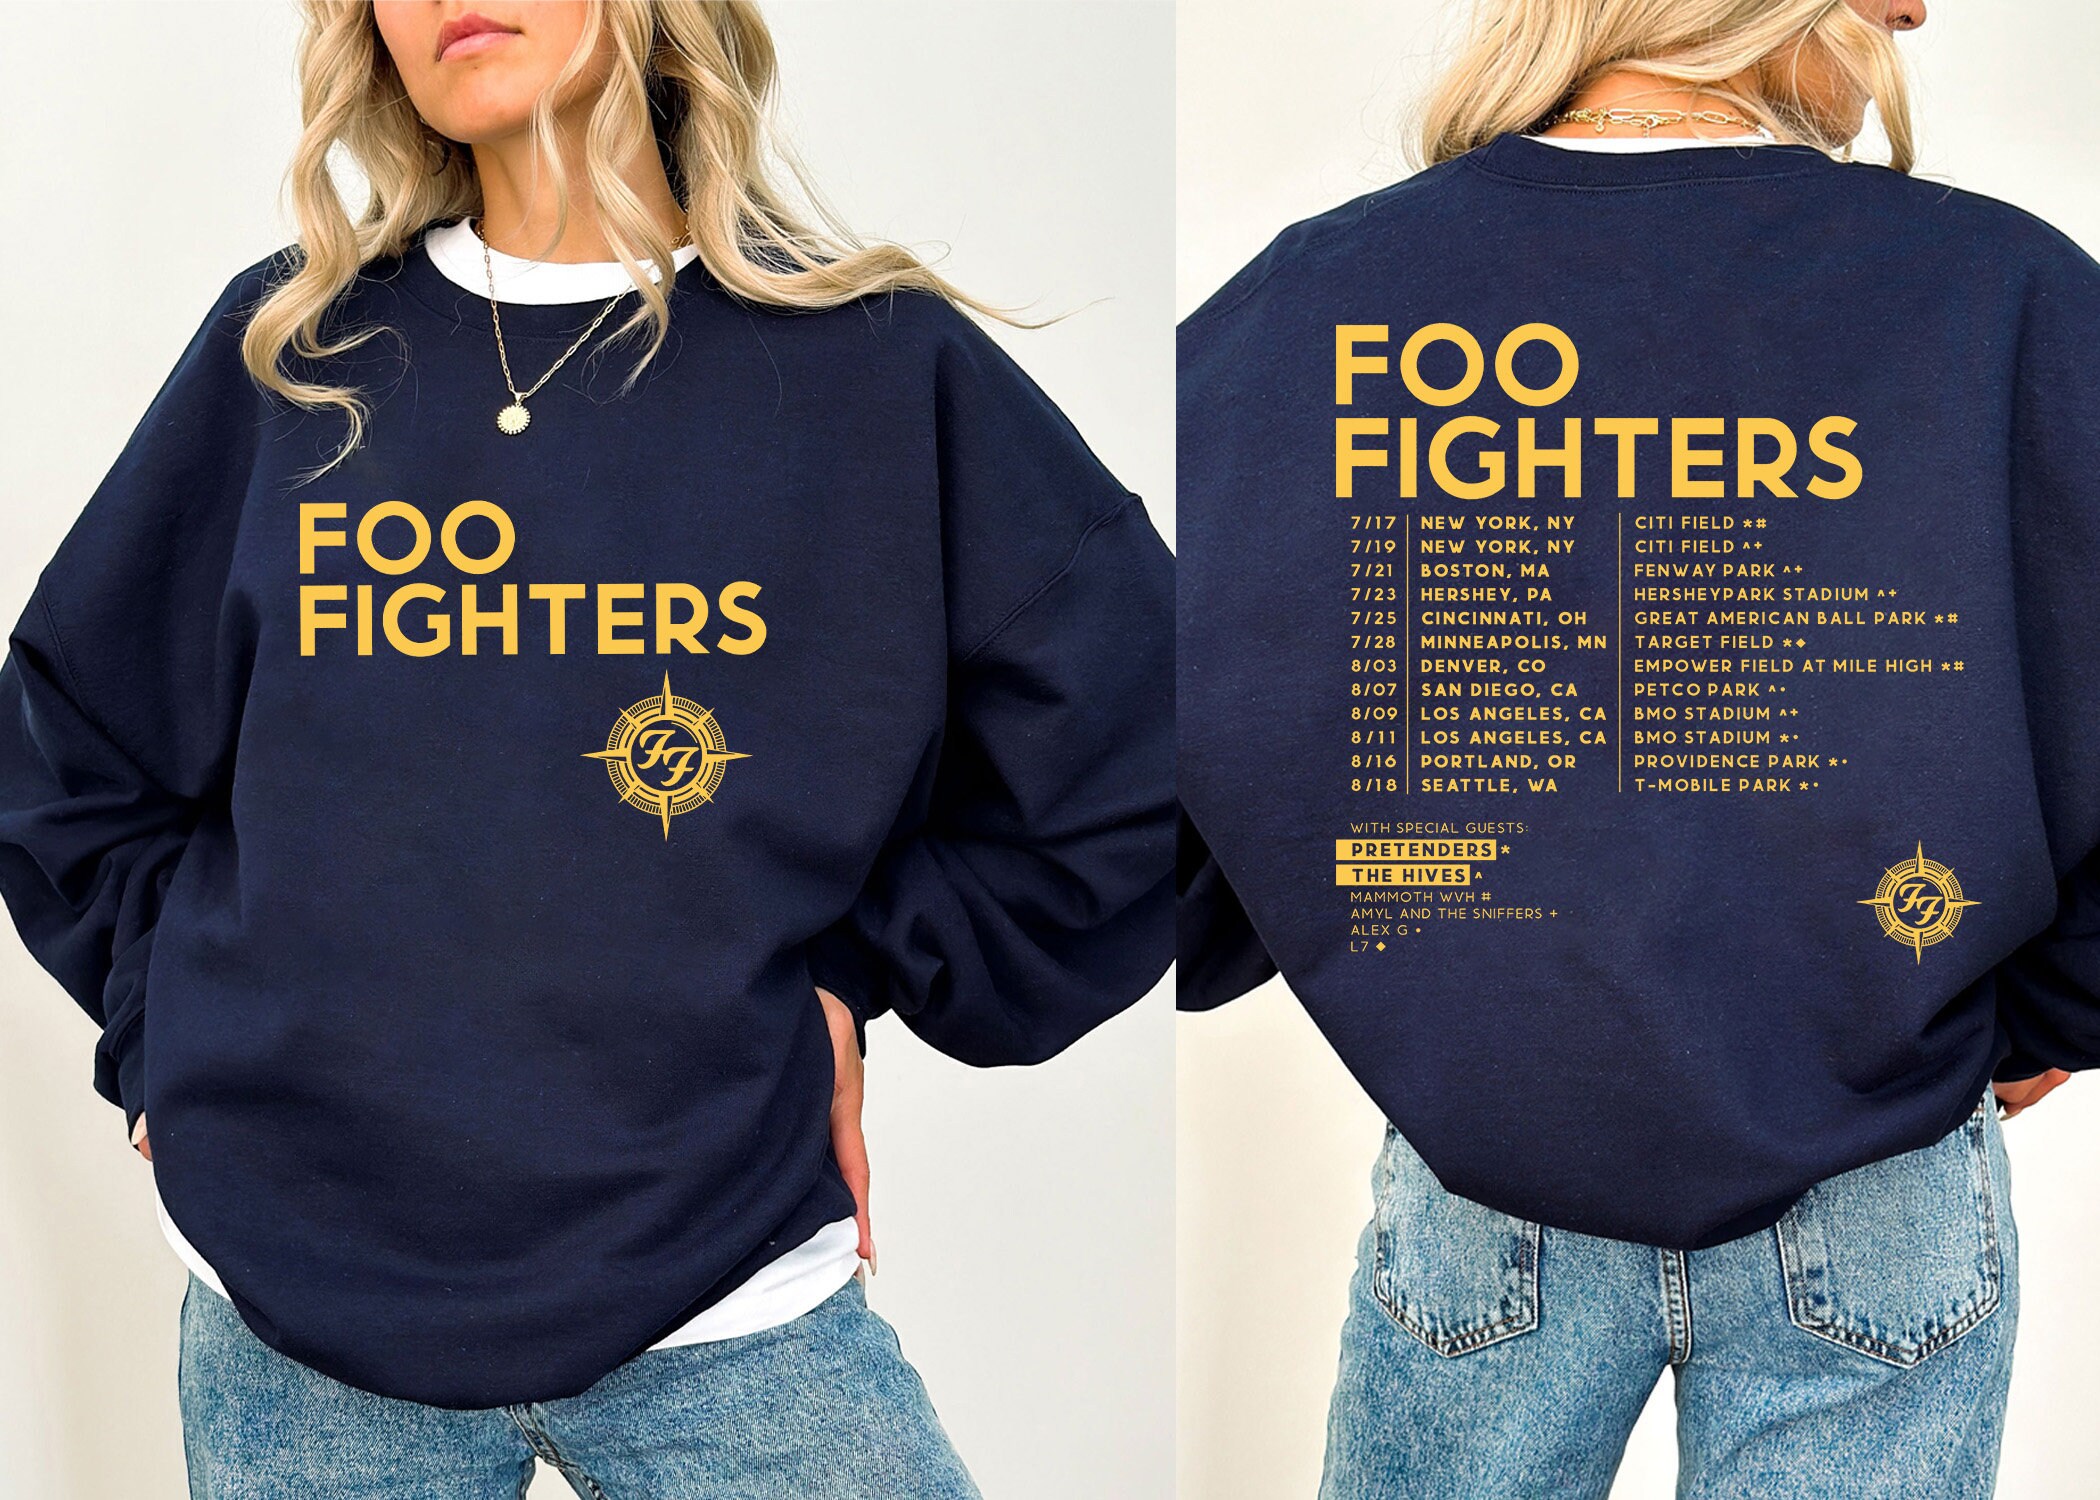 FF Band Fighters Band Tour 2024, FF Band Fighters Fan Shirt